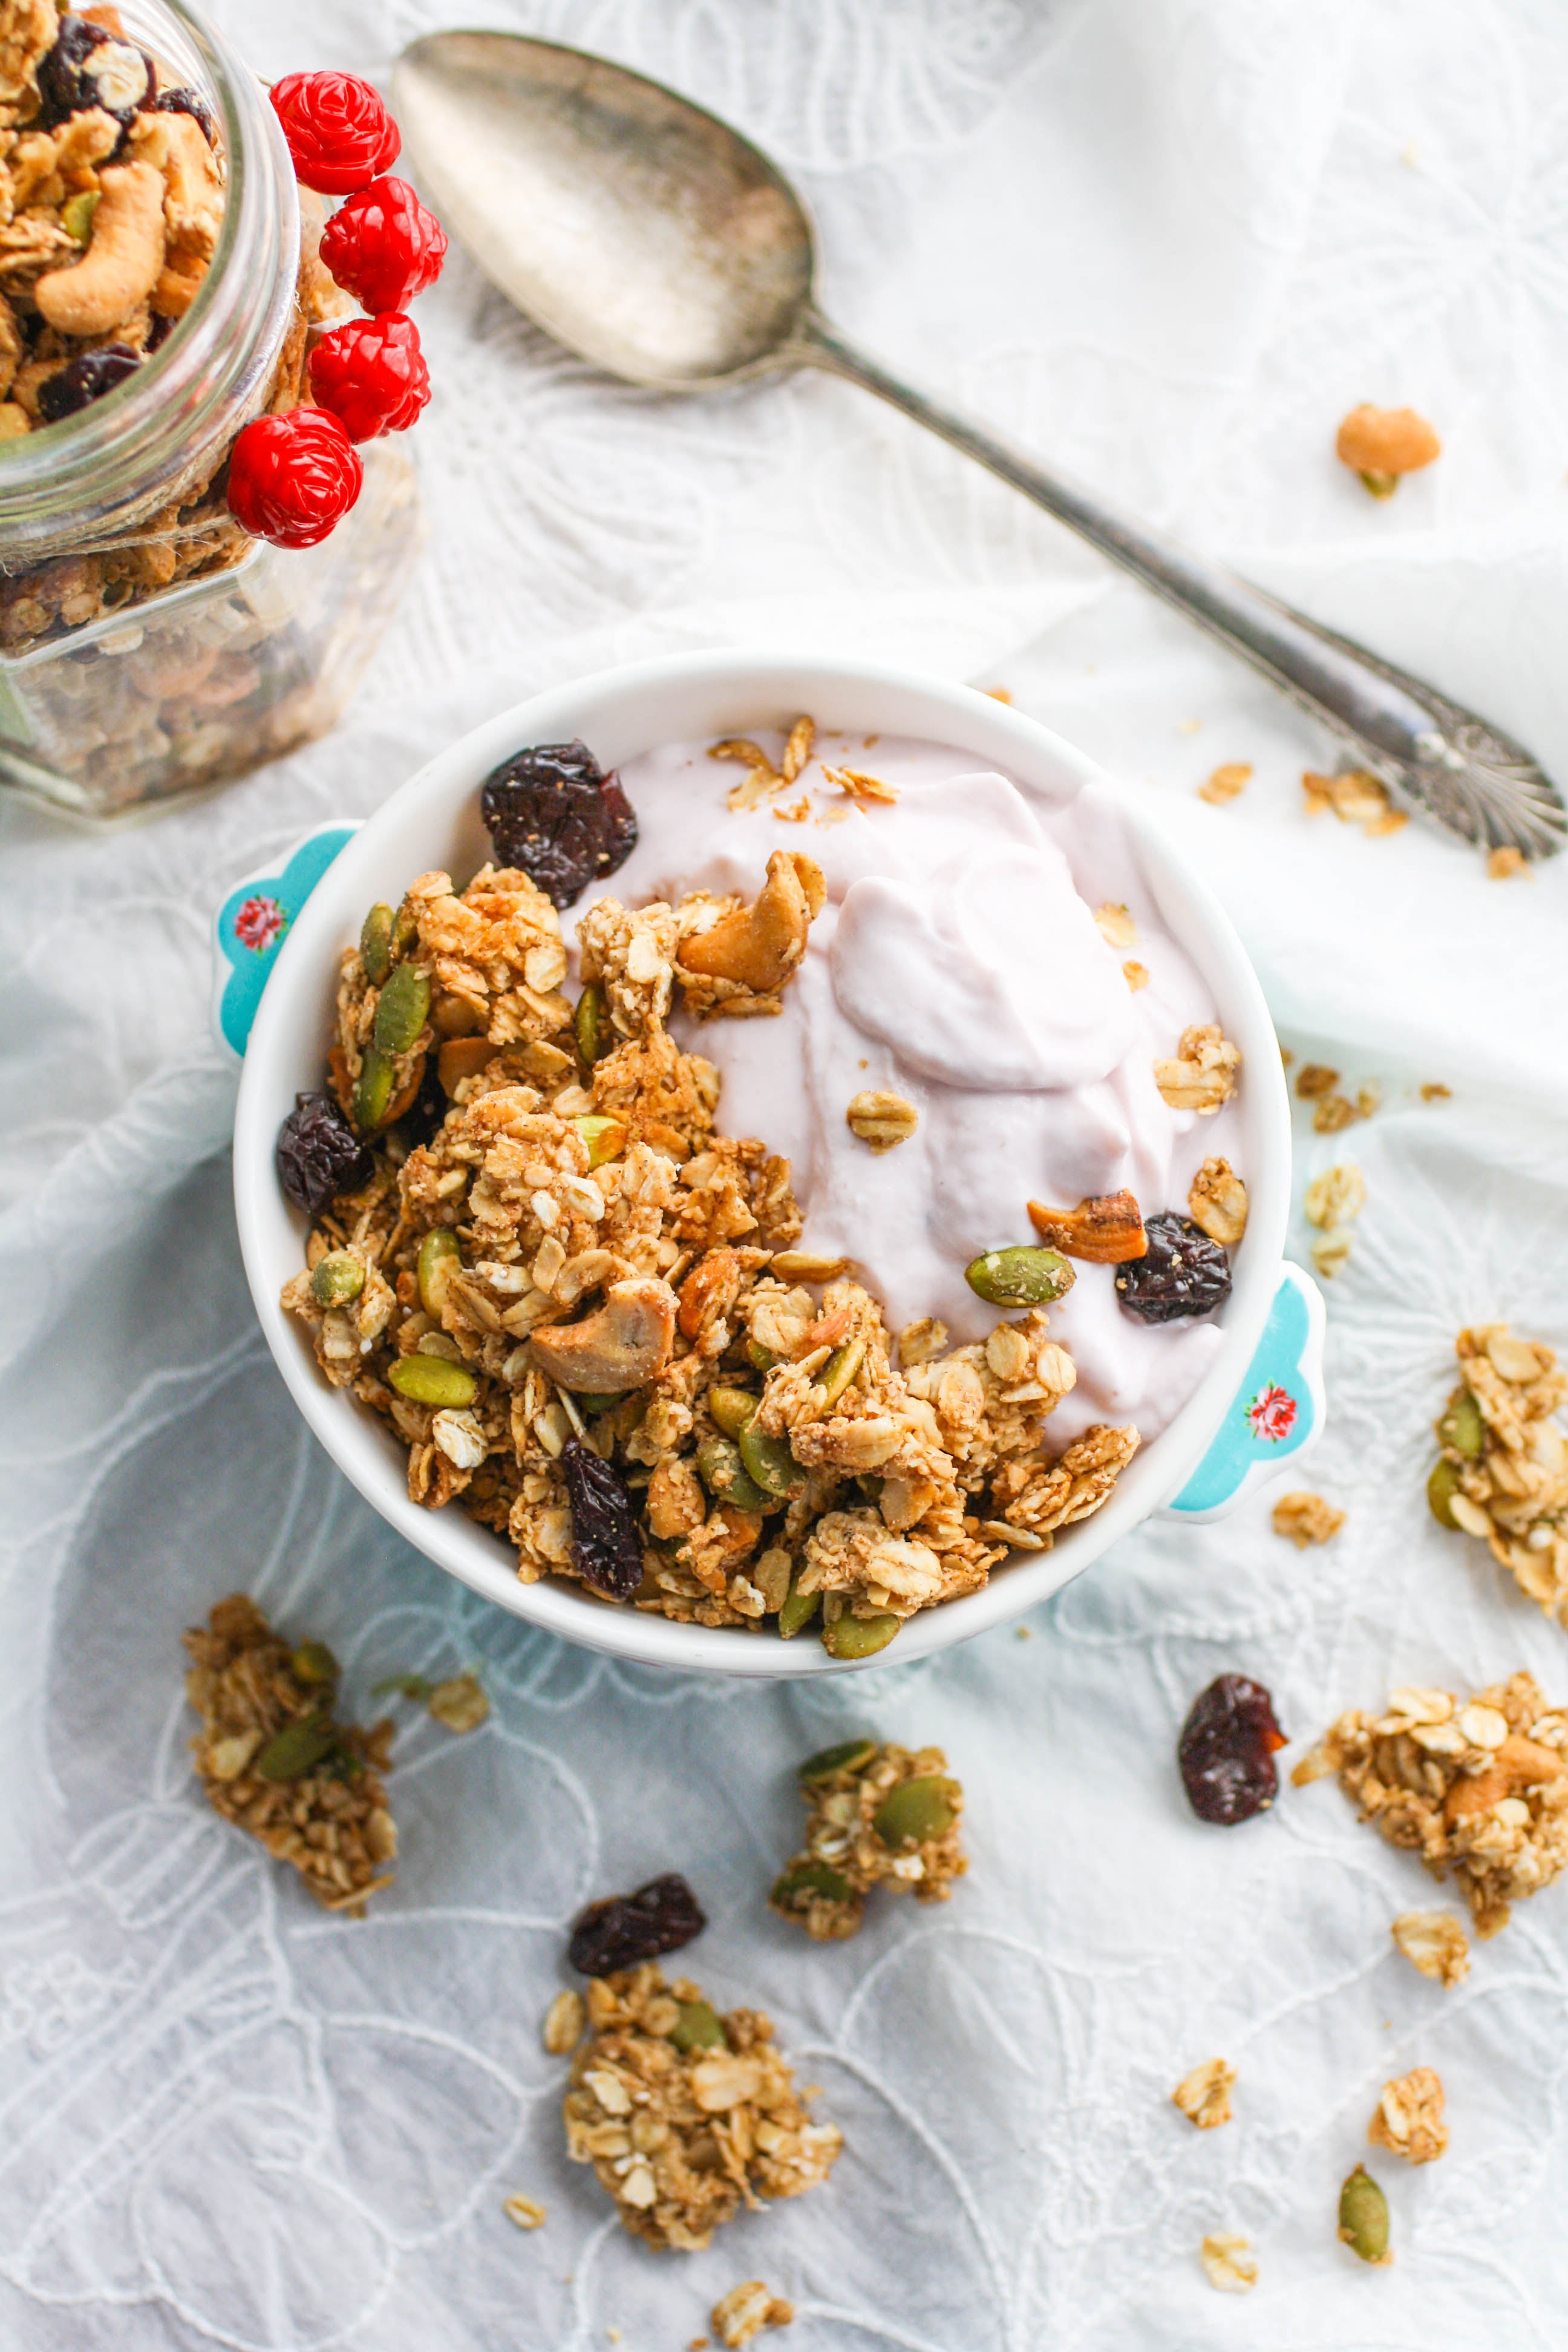 Chunky Cherry-Chai Granola is a wonderful addition to your morning meal. You'll love this homemade granola and how easy it is to make.